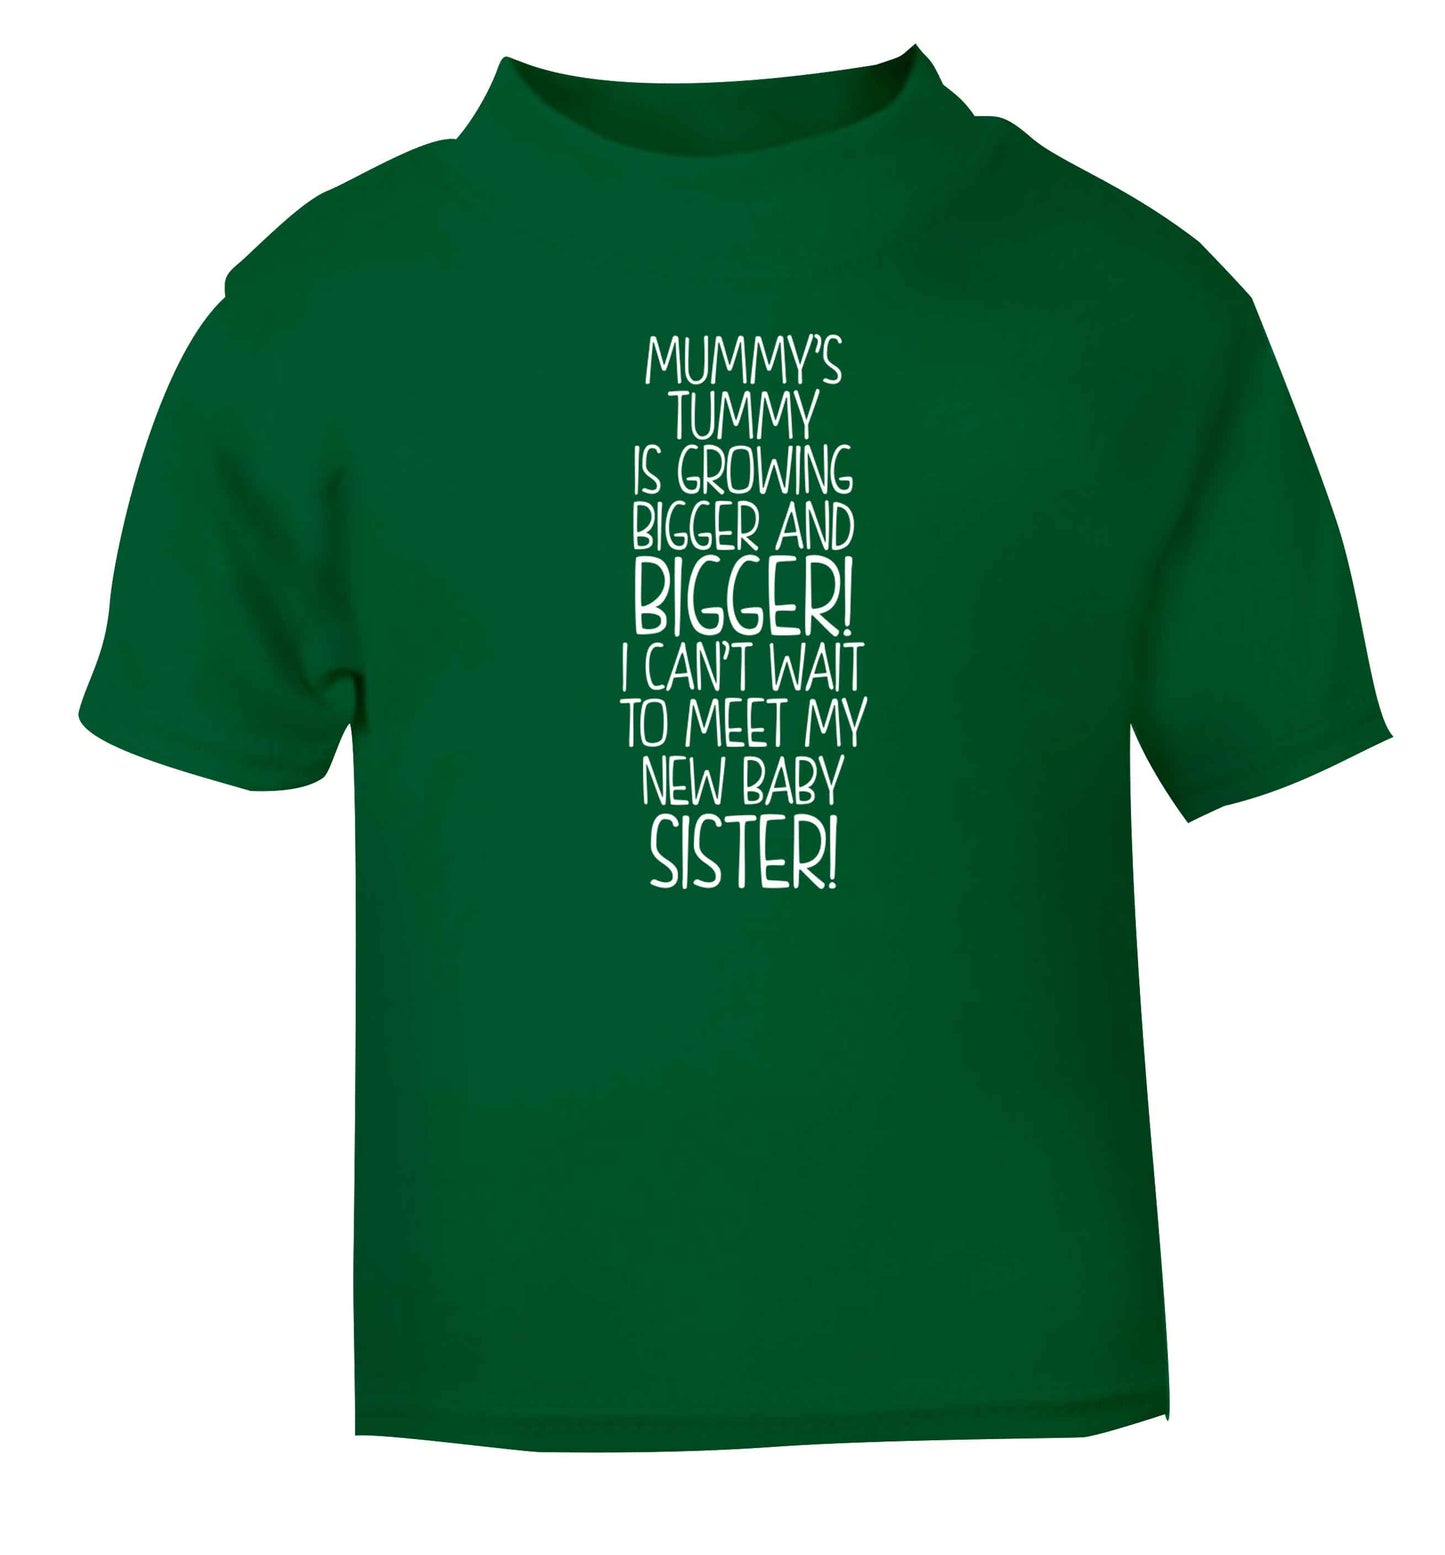 Mummy's tummy is growing bigger and bigger I can't wait to meet my new baby sister! green Baby Toddler Tshirt 2 Years